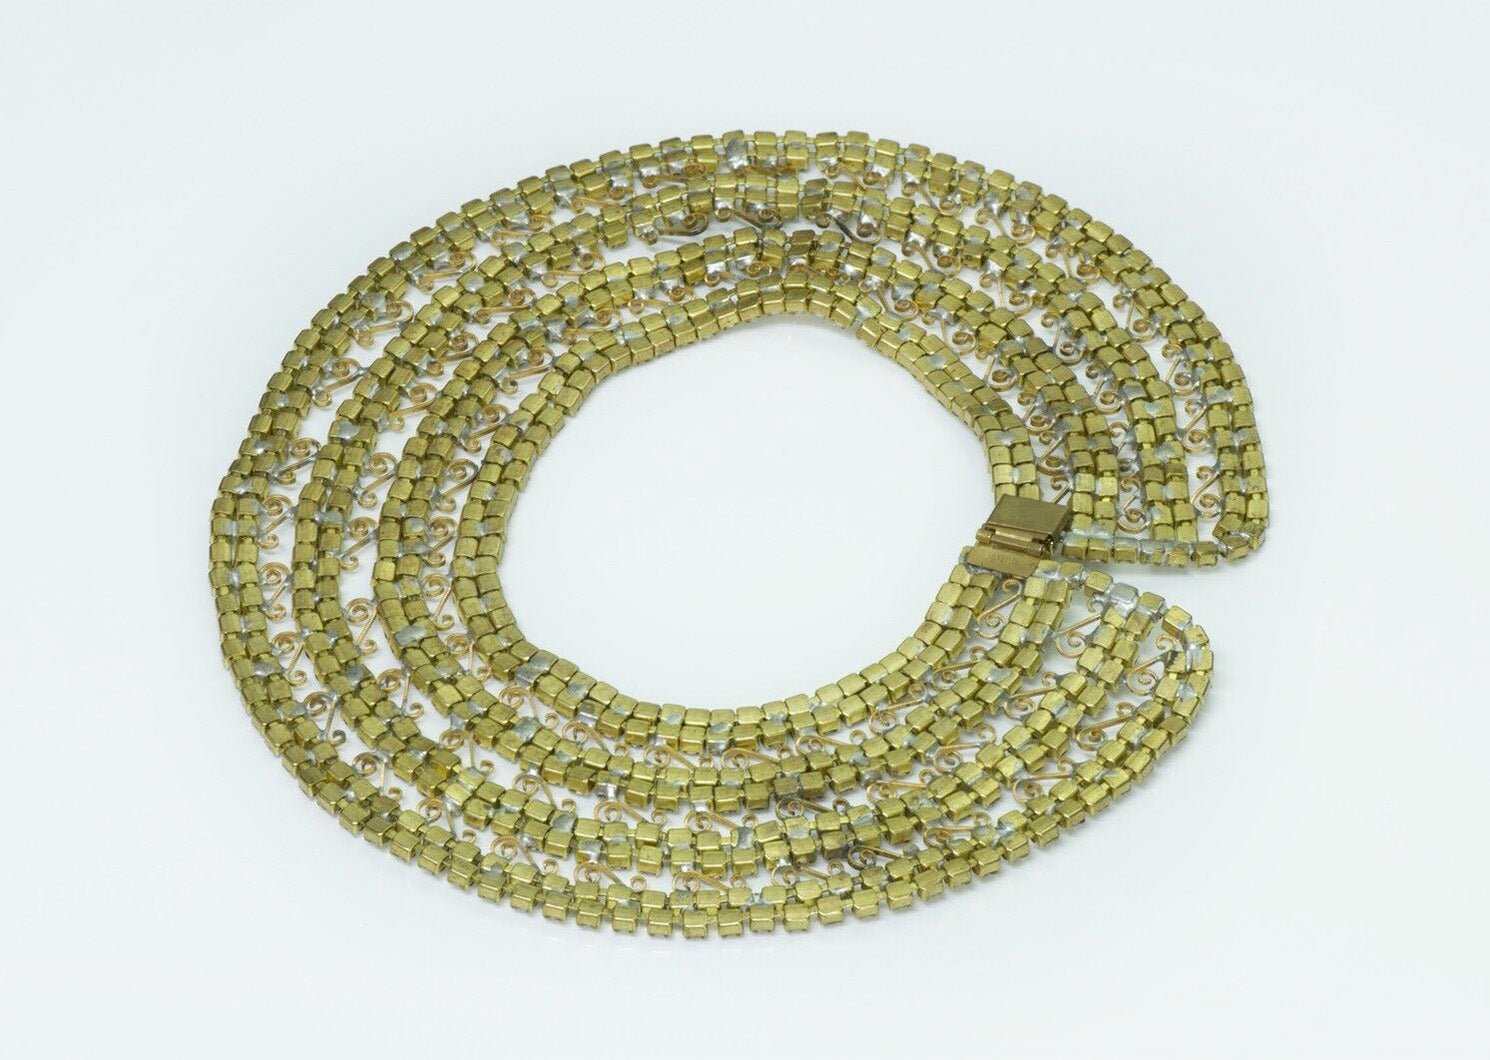 Weiss 1950’s Crystal Bib Necklace